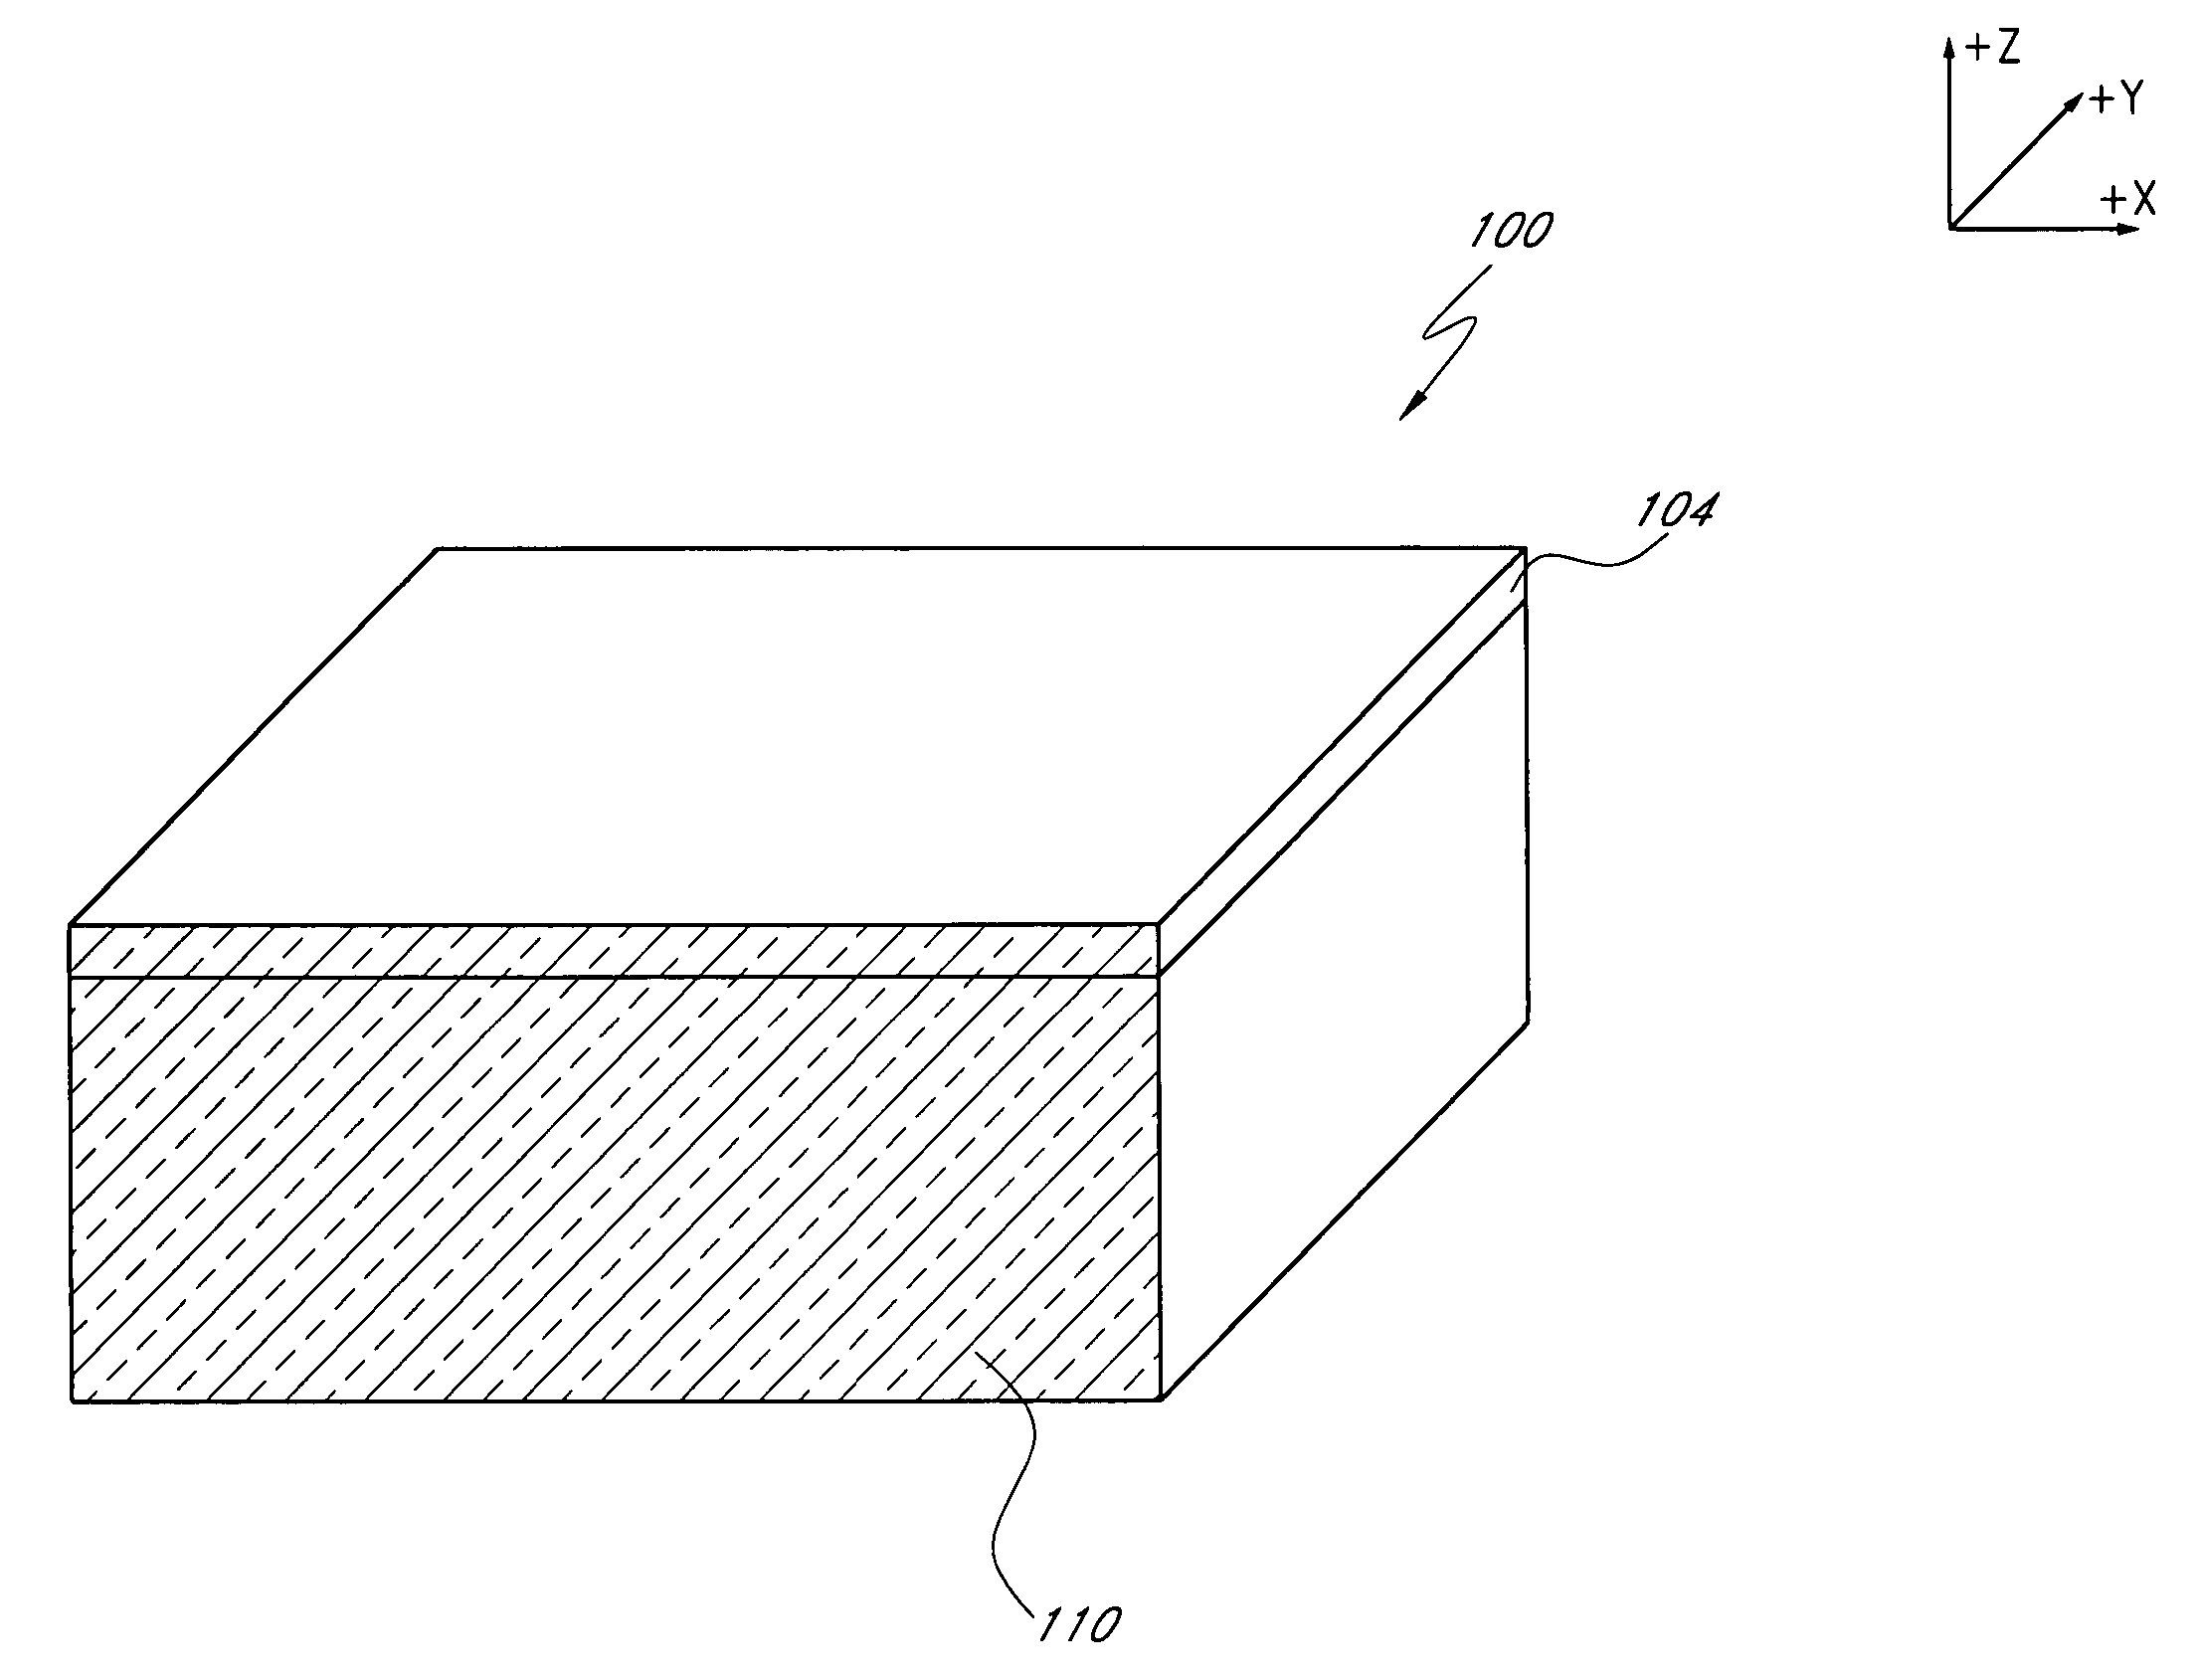 Vertical gated access transistor